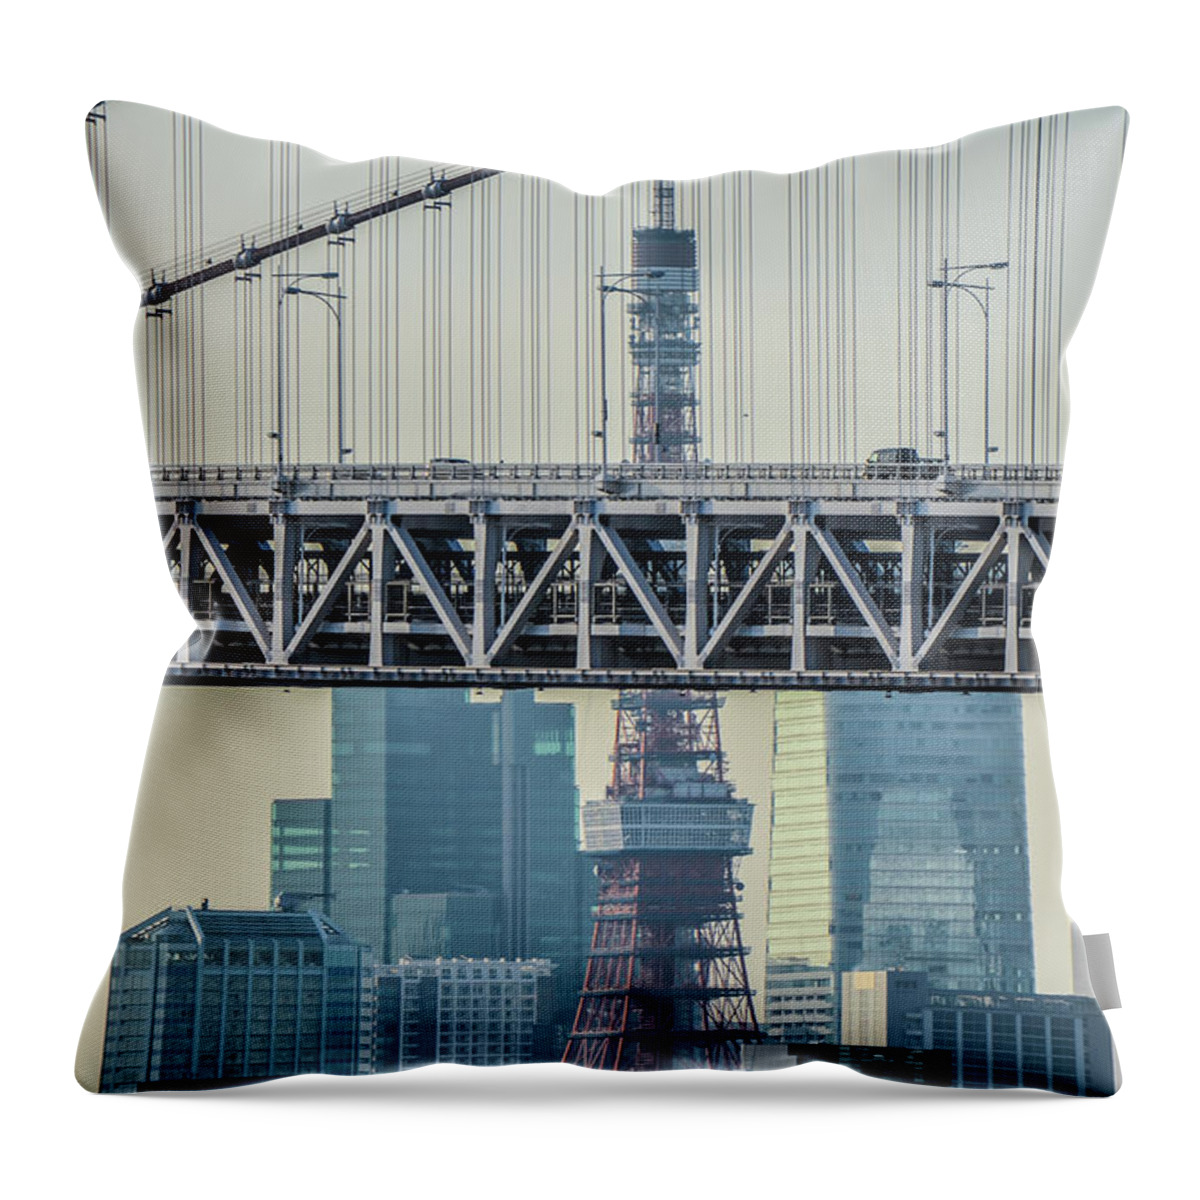 Tokyo Tower Throw Pillow featuring the photograph Tokyo Tower And Rainbow Bridge by Image Courtesy Trevor Dobson